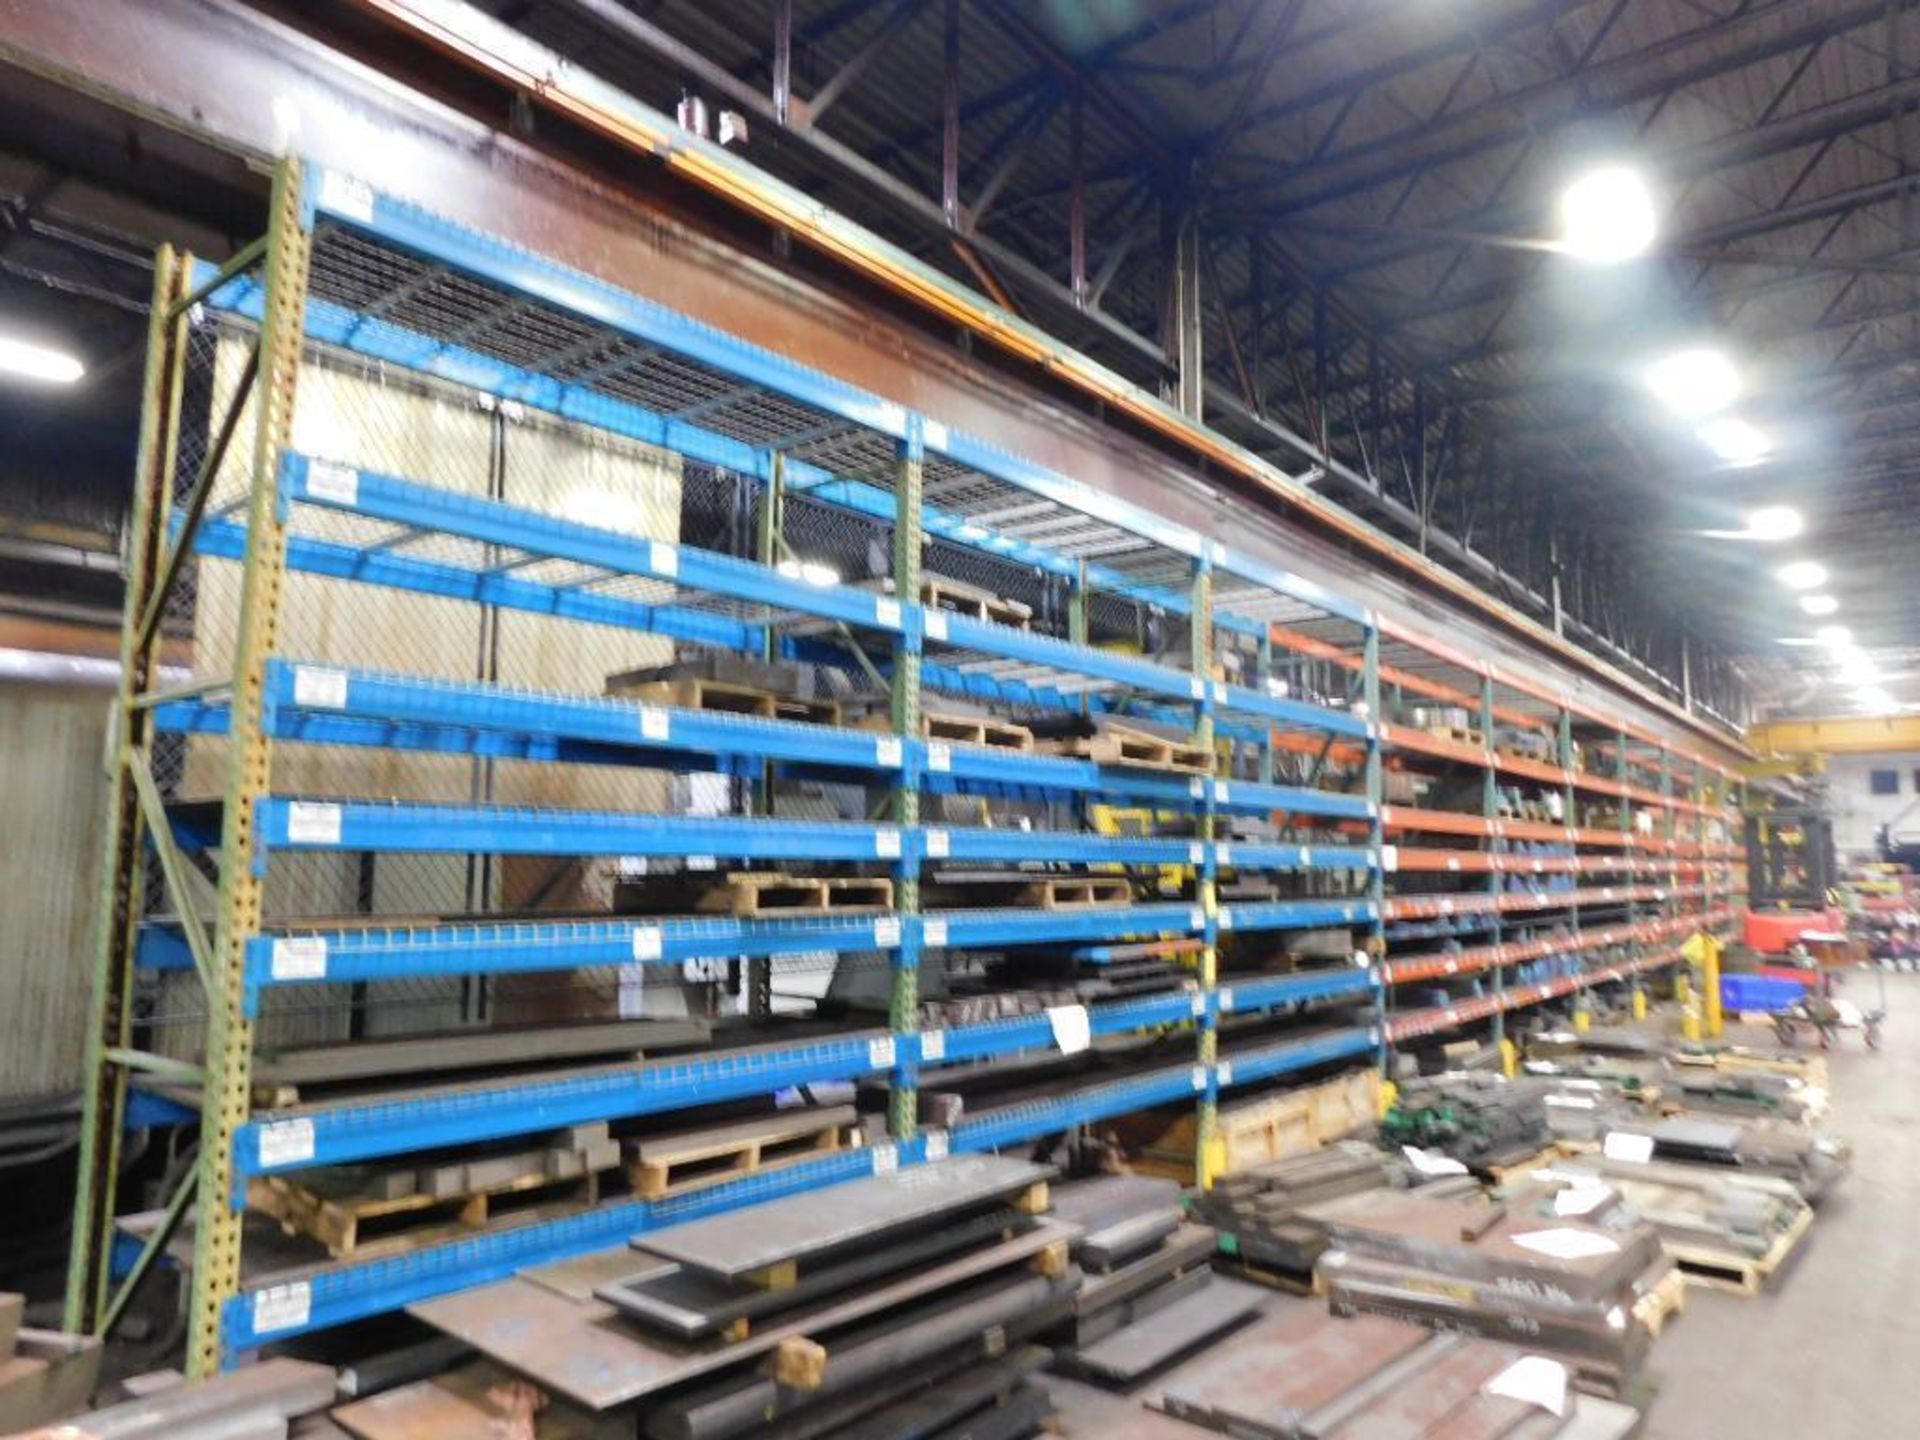 LOT: (10) Sections Pallet Rack, 12' H x 9' W x 36" D Multi Tier w/Wire Decking & Some Steel Decking